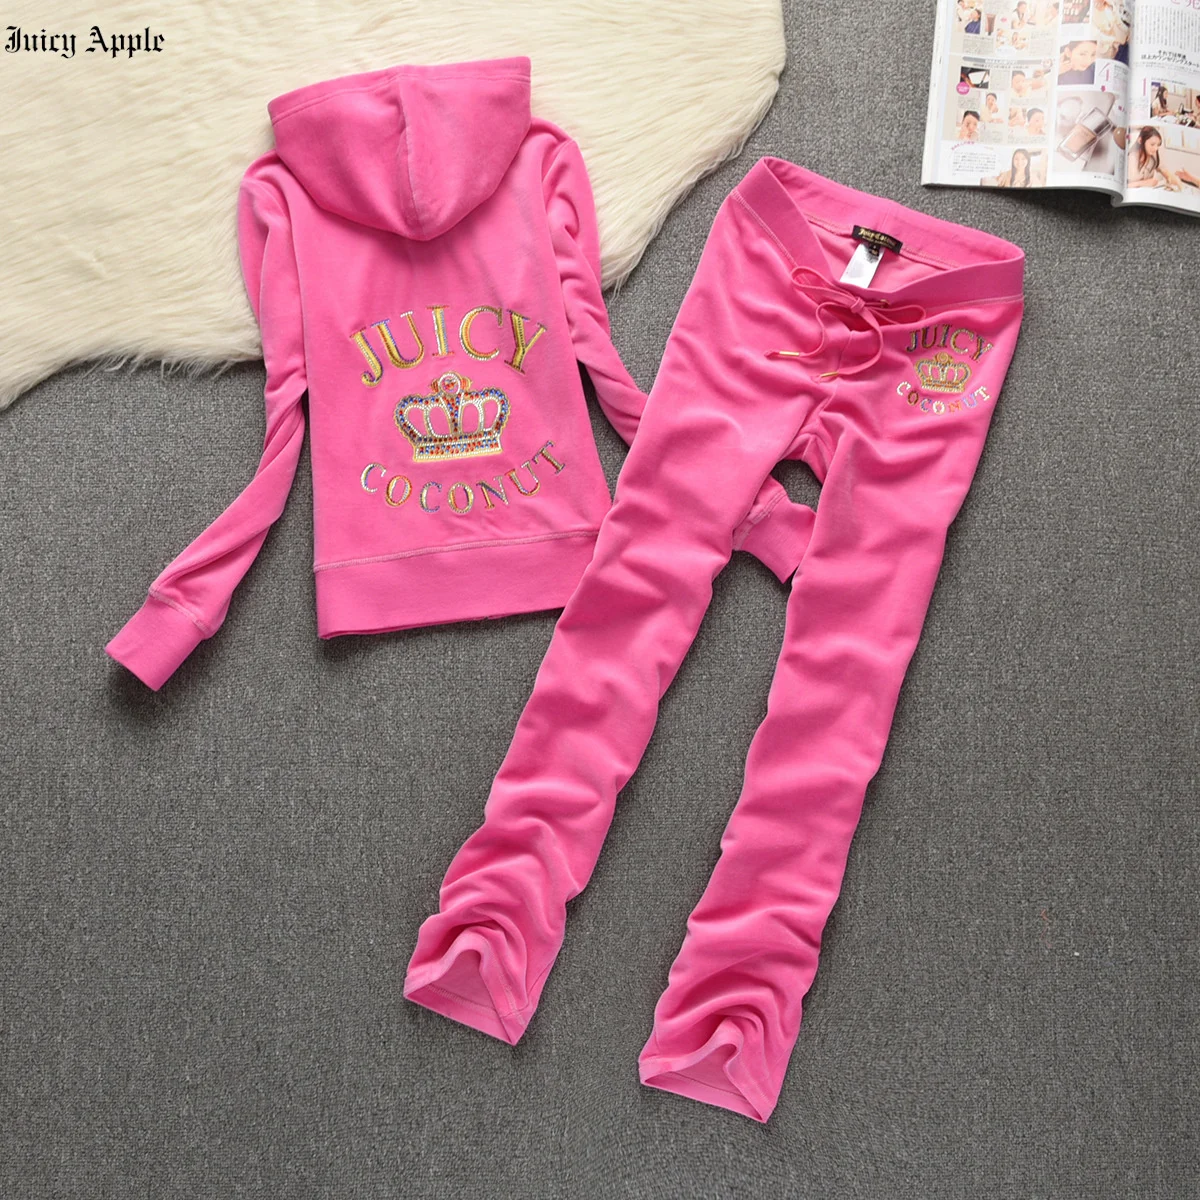 Juicy Apple Tracksuit Women Clothing 2 Pieces Set New Running Sports Suit Long Sleeve Hoodie + Pants Jogging Casual Fashion Suit